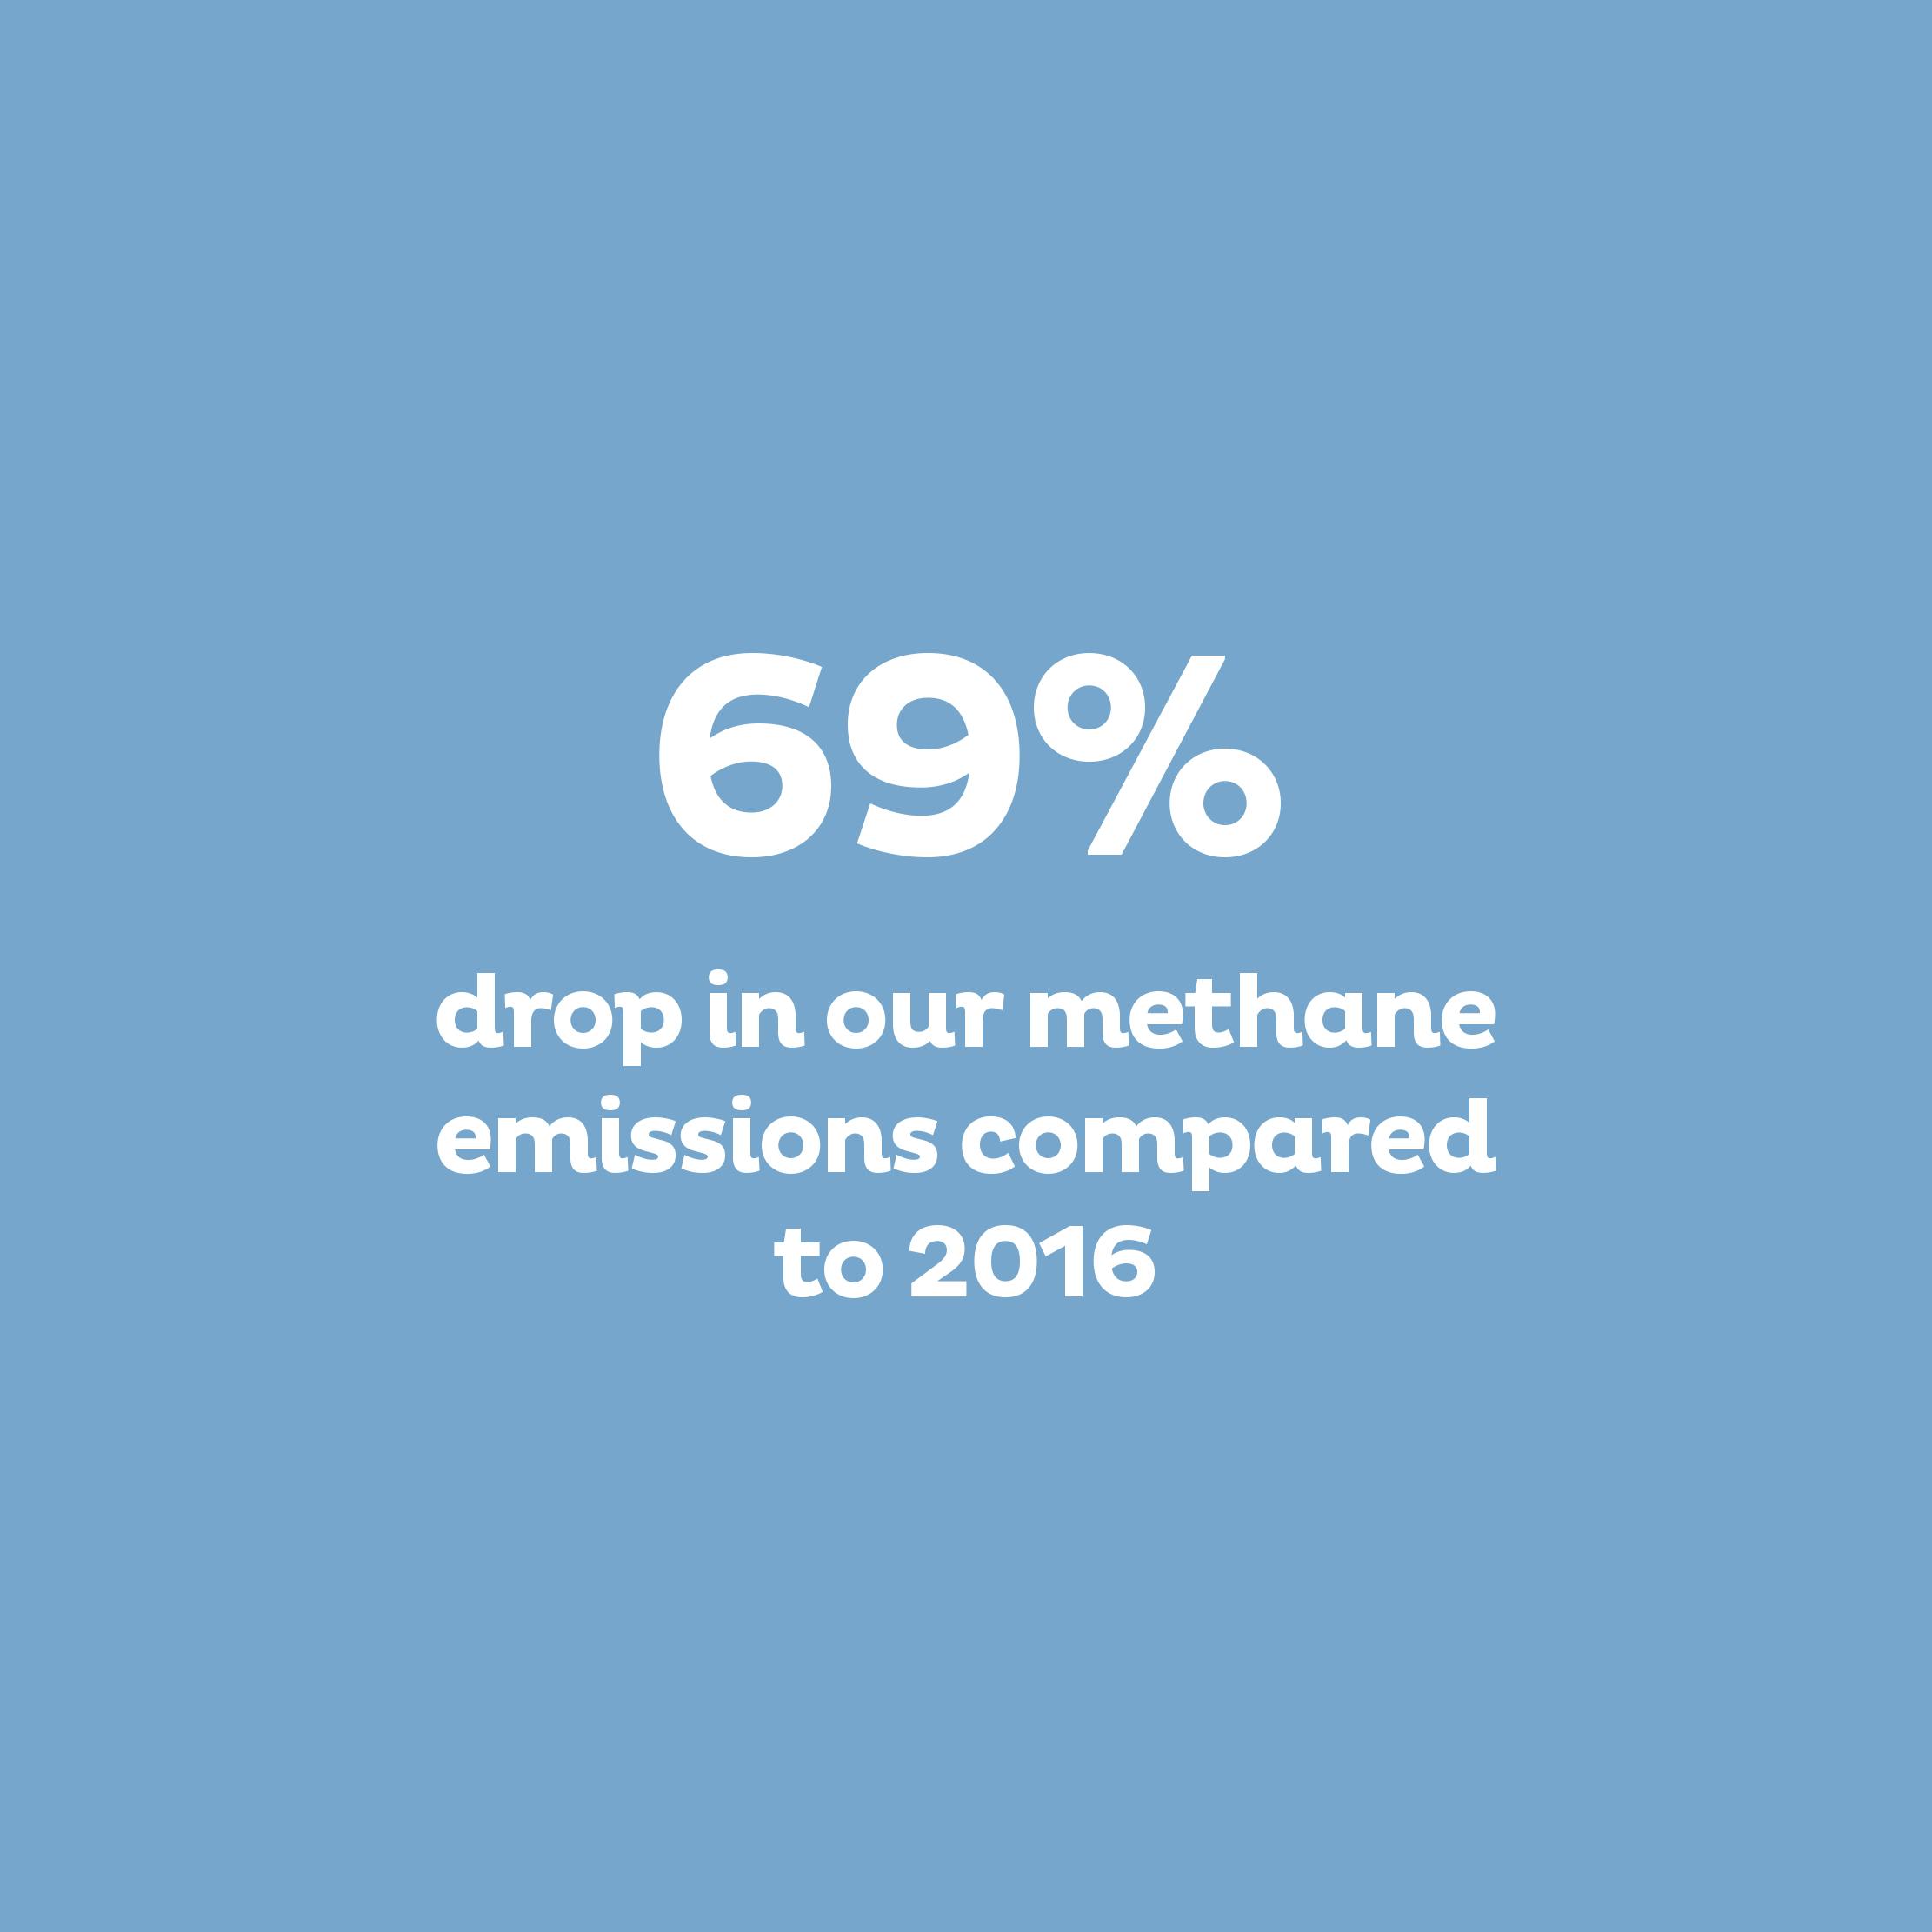 69% drop in our methane emissions compared to 2016